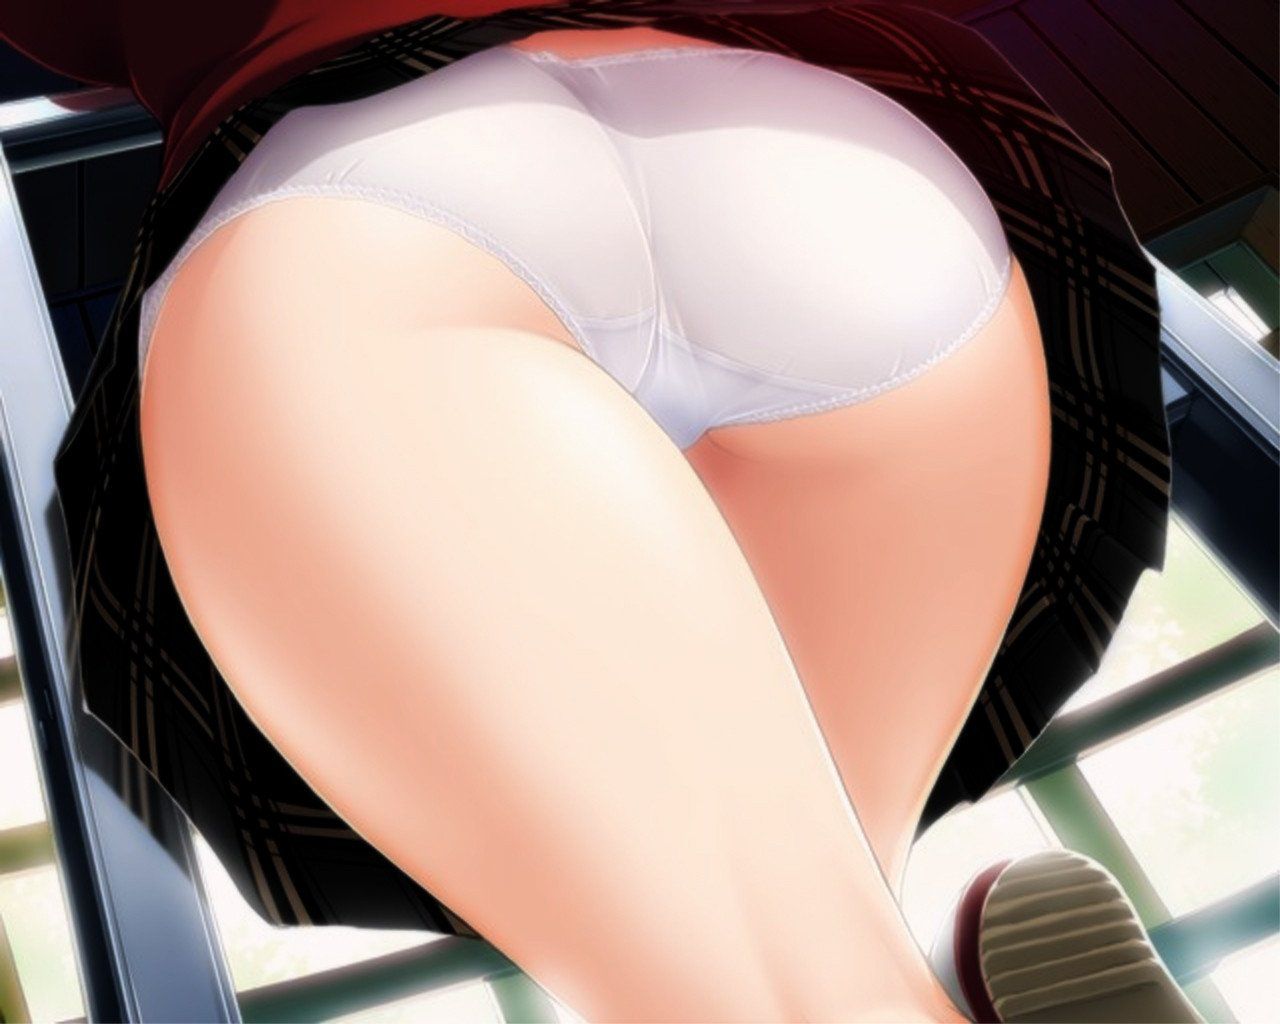 【Secondary erotica】 Here is an erotic image that can observe buttocks and in a close-up state 23